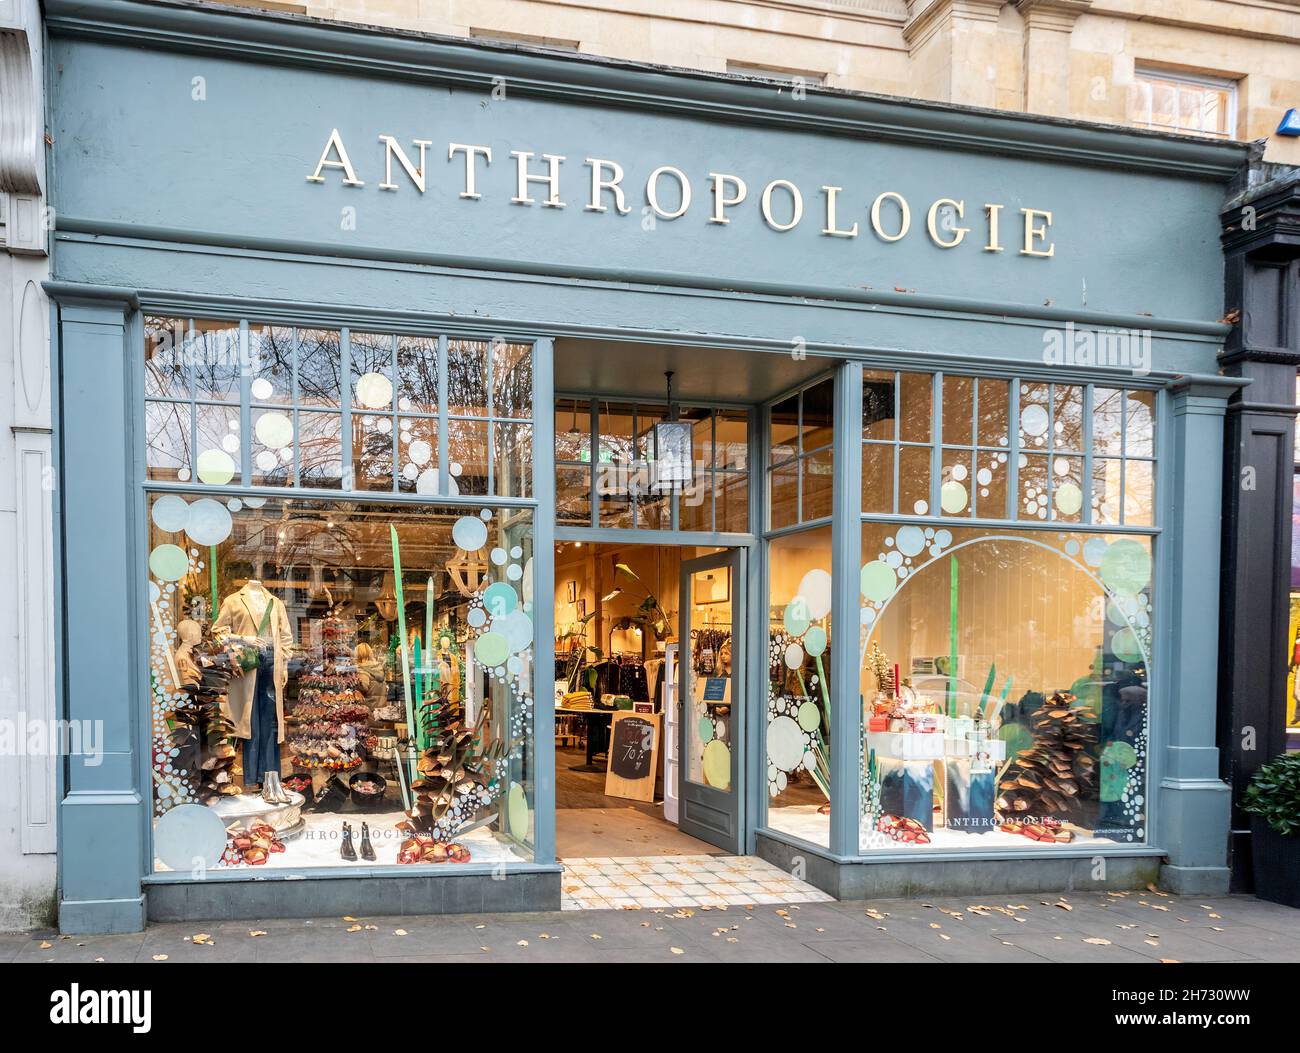 Anthropologie Shop on the Promenade in ...